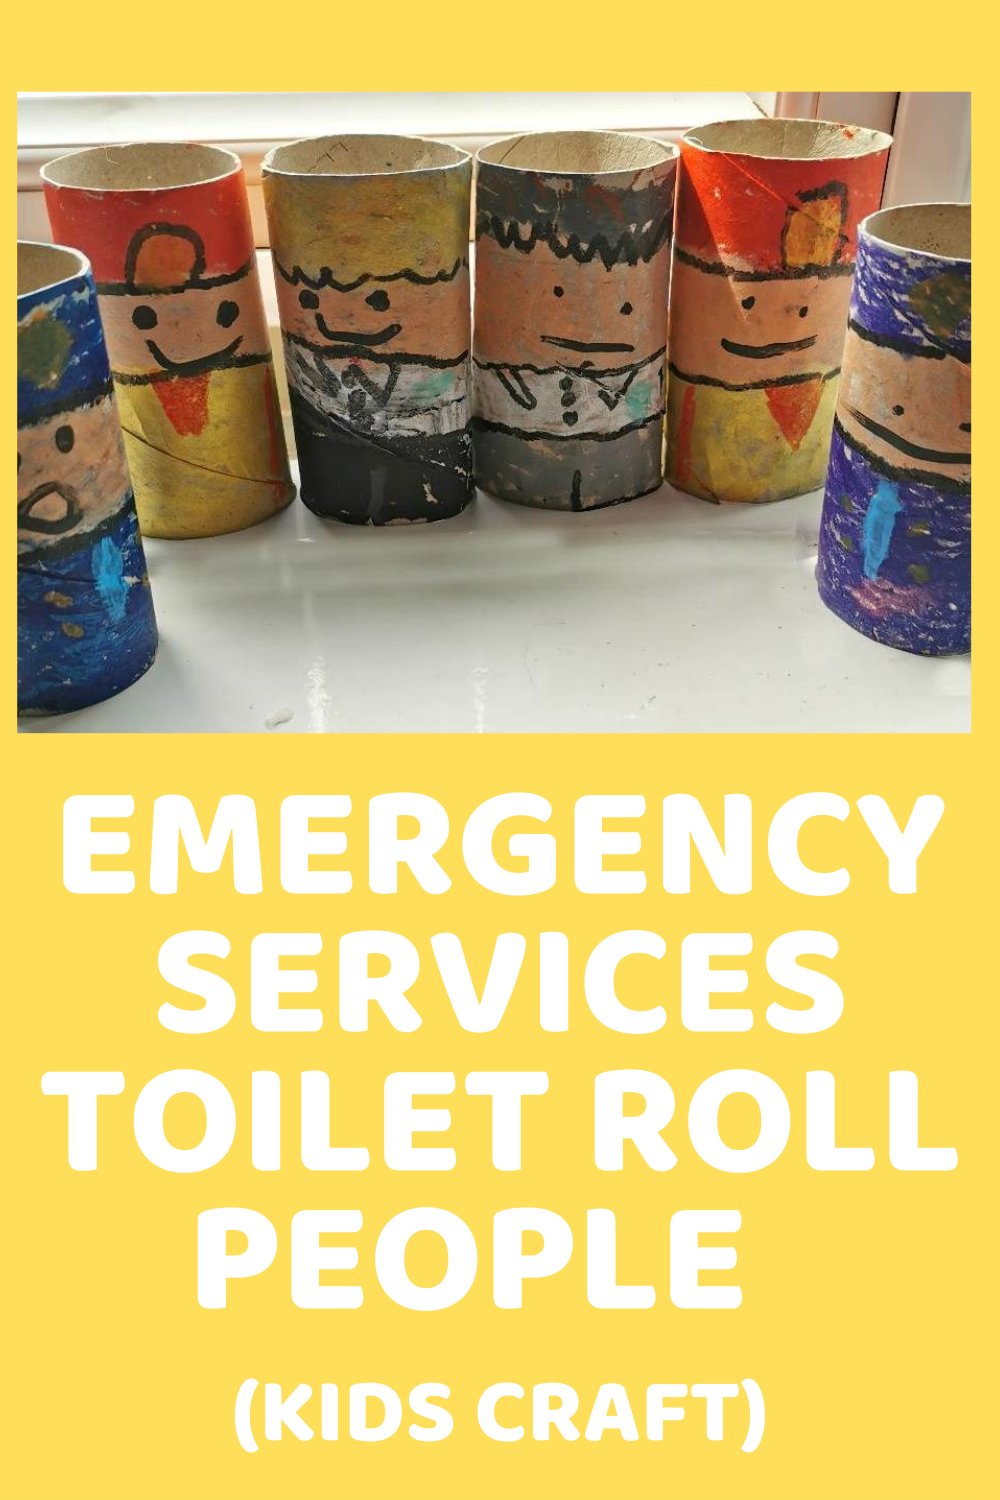 Emergency Services Toilet Roll People - Kids Craft